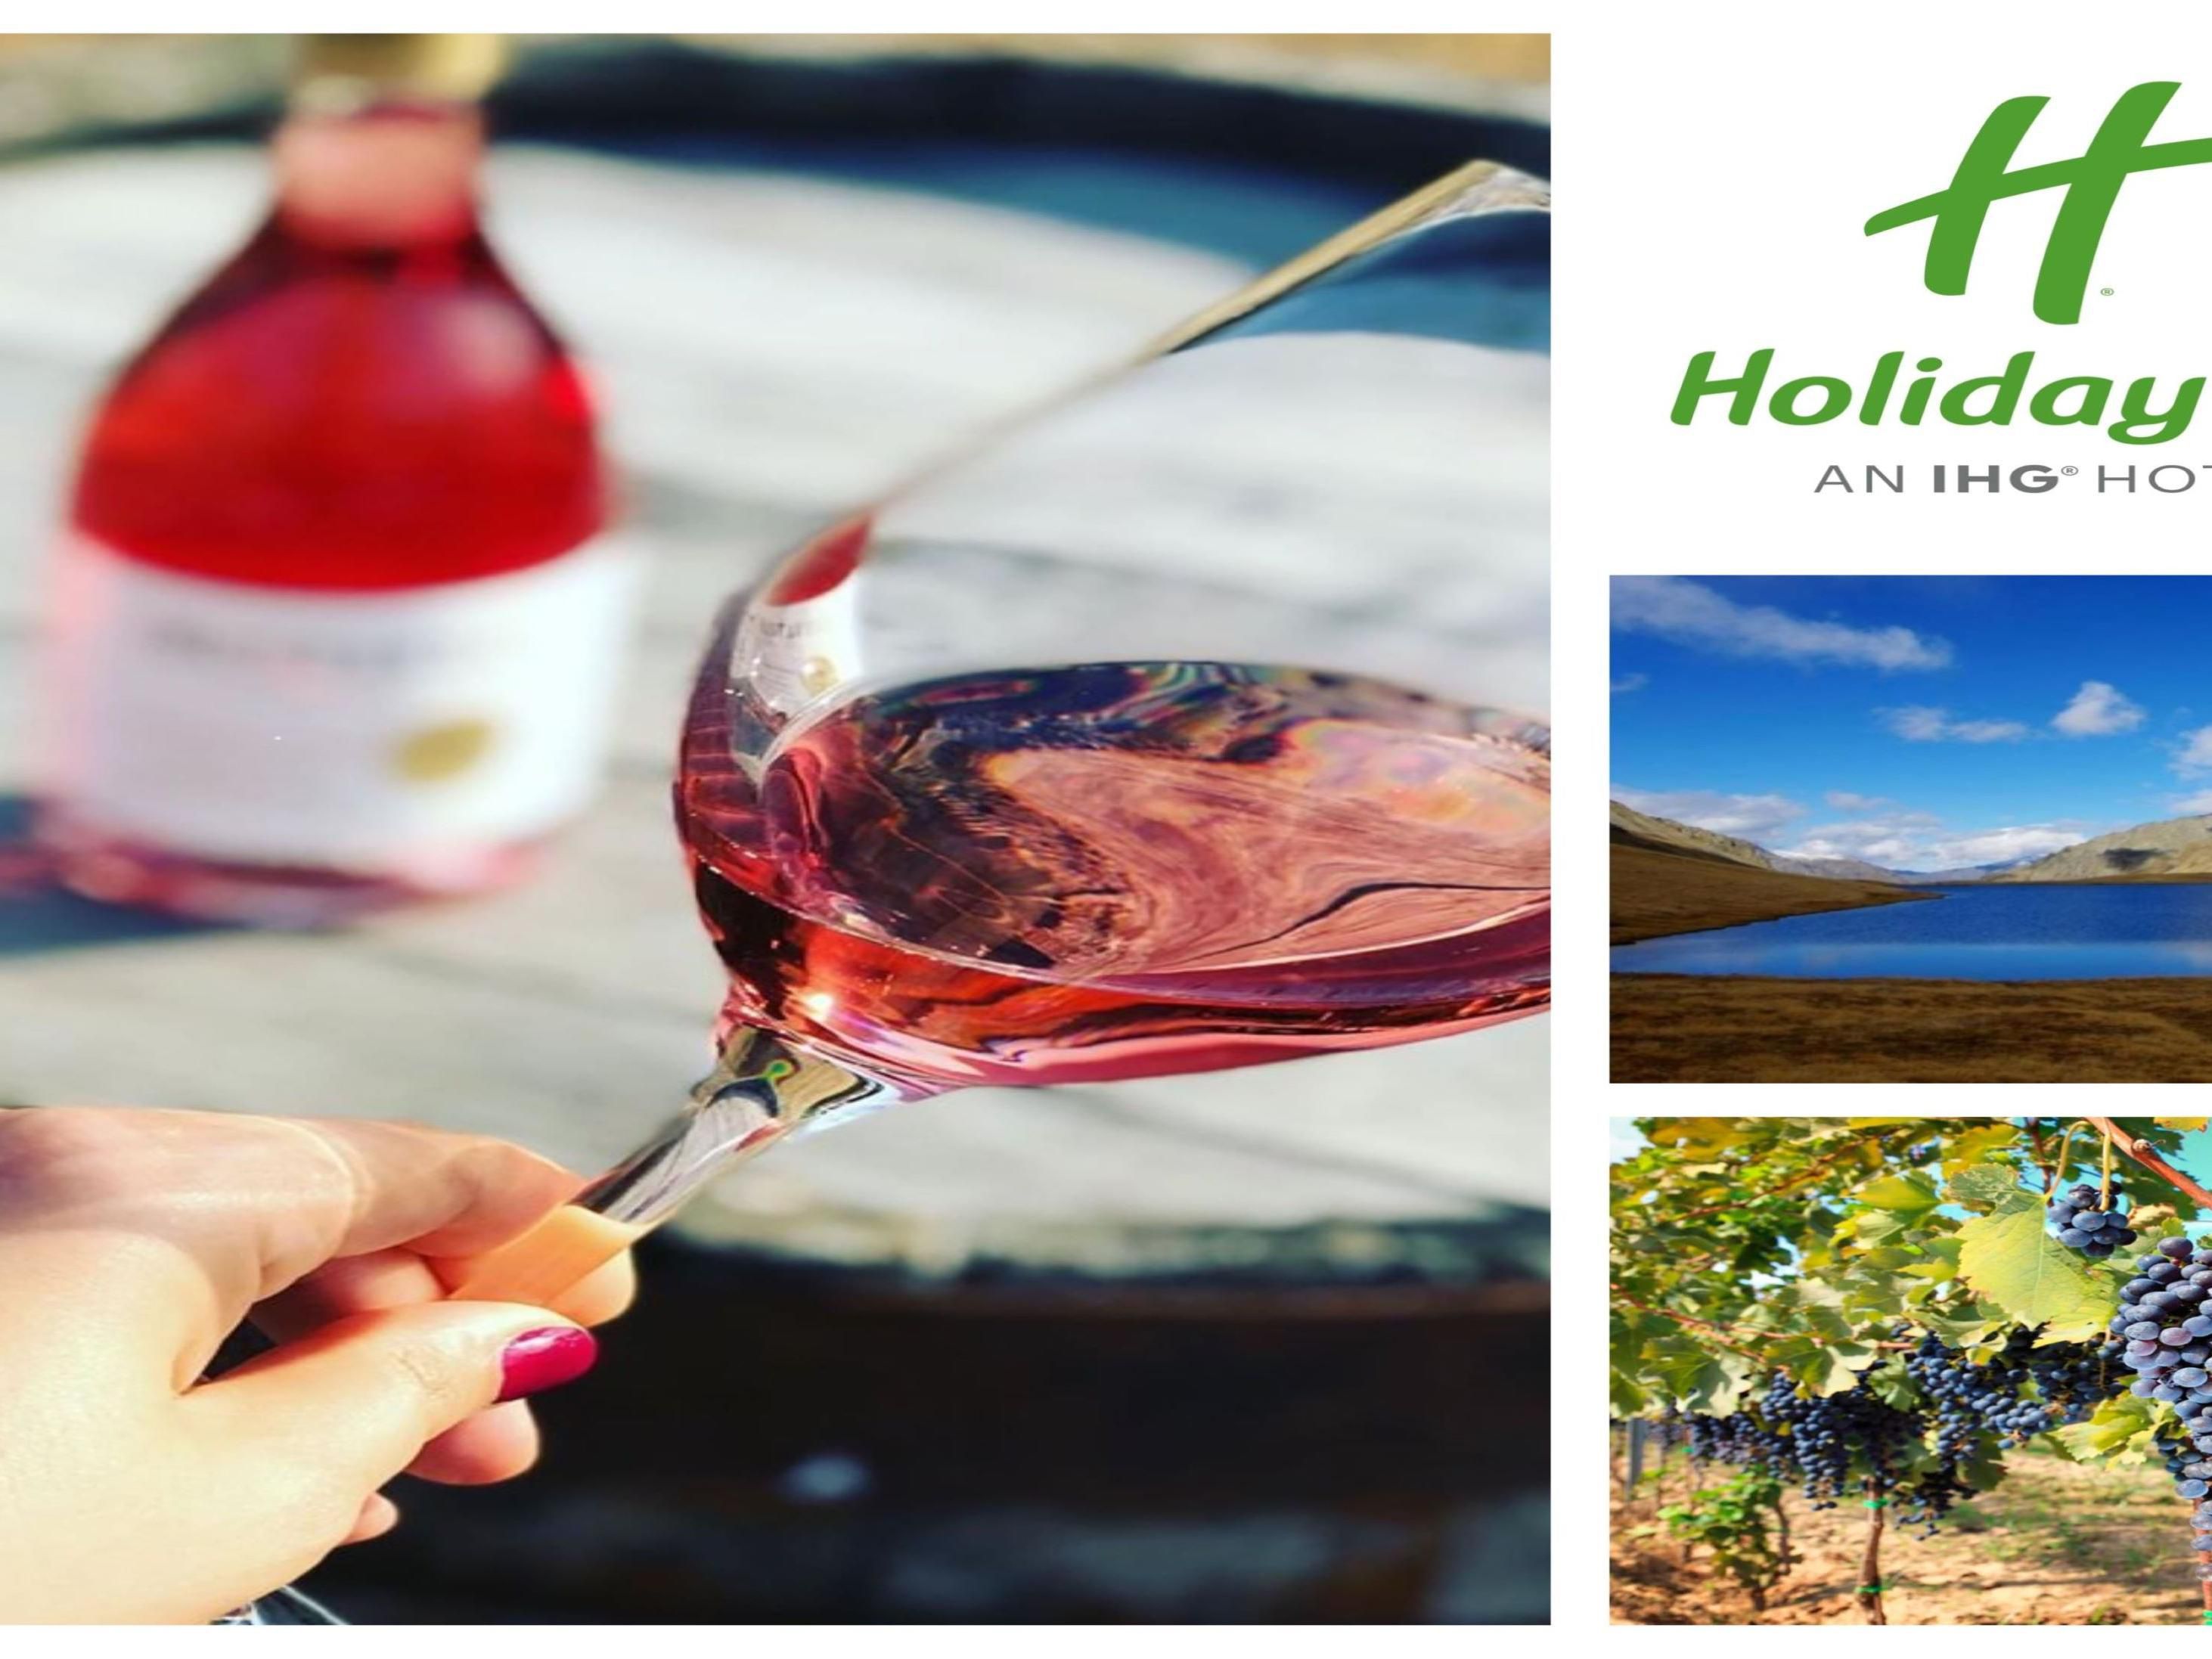 HI Telavi and Kakheti wine region: do not miss the opportunity of being accommodated and enjoy the most famous space in Georgia for its wine route, in particular Telavi, Kvareli and Signagi, as well as for hiking opportunities in its two national parks Lagodekhi and Vaslovani. Do not hesitate to contact us for further information: +995 32 261 11 11